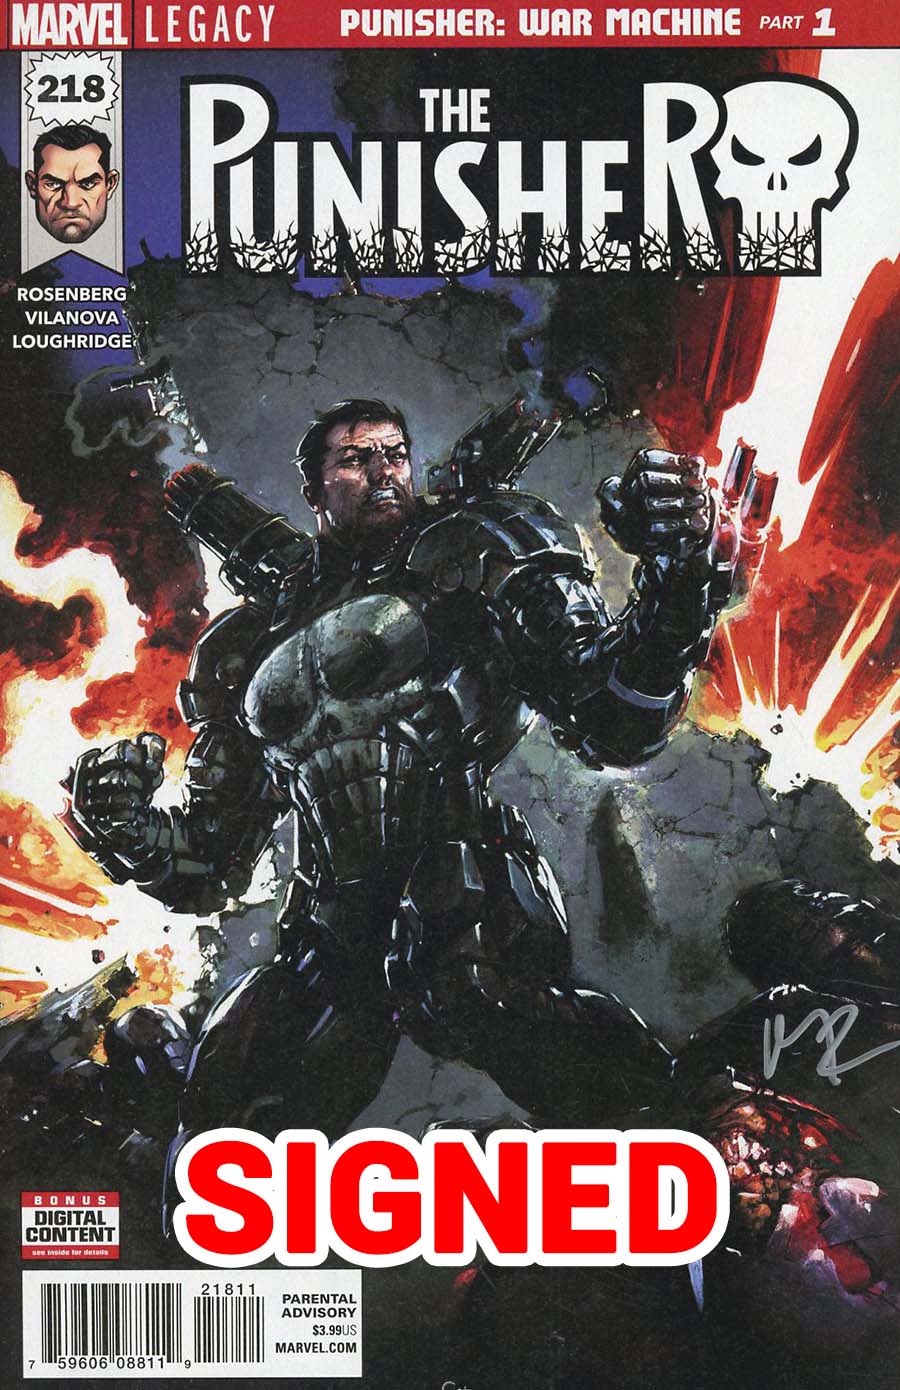 Punisher Vol 10 #218 Cover F Regular Clayton Crain Cover Signed By Matthew Rosenberg (Marvel Legacy Tie-In)